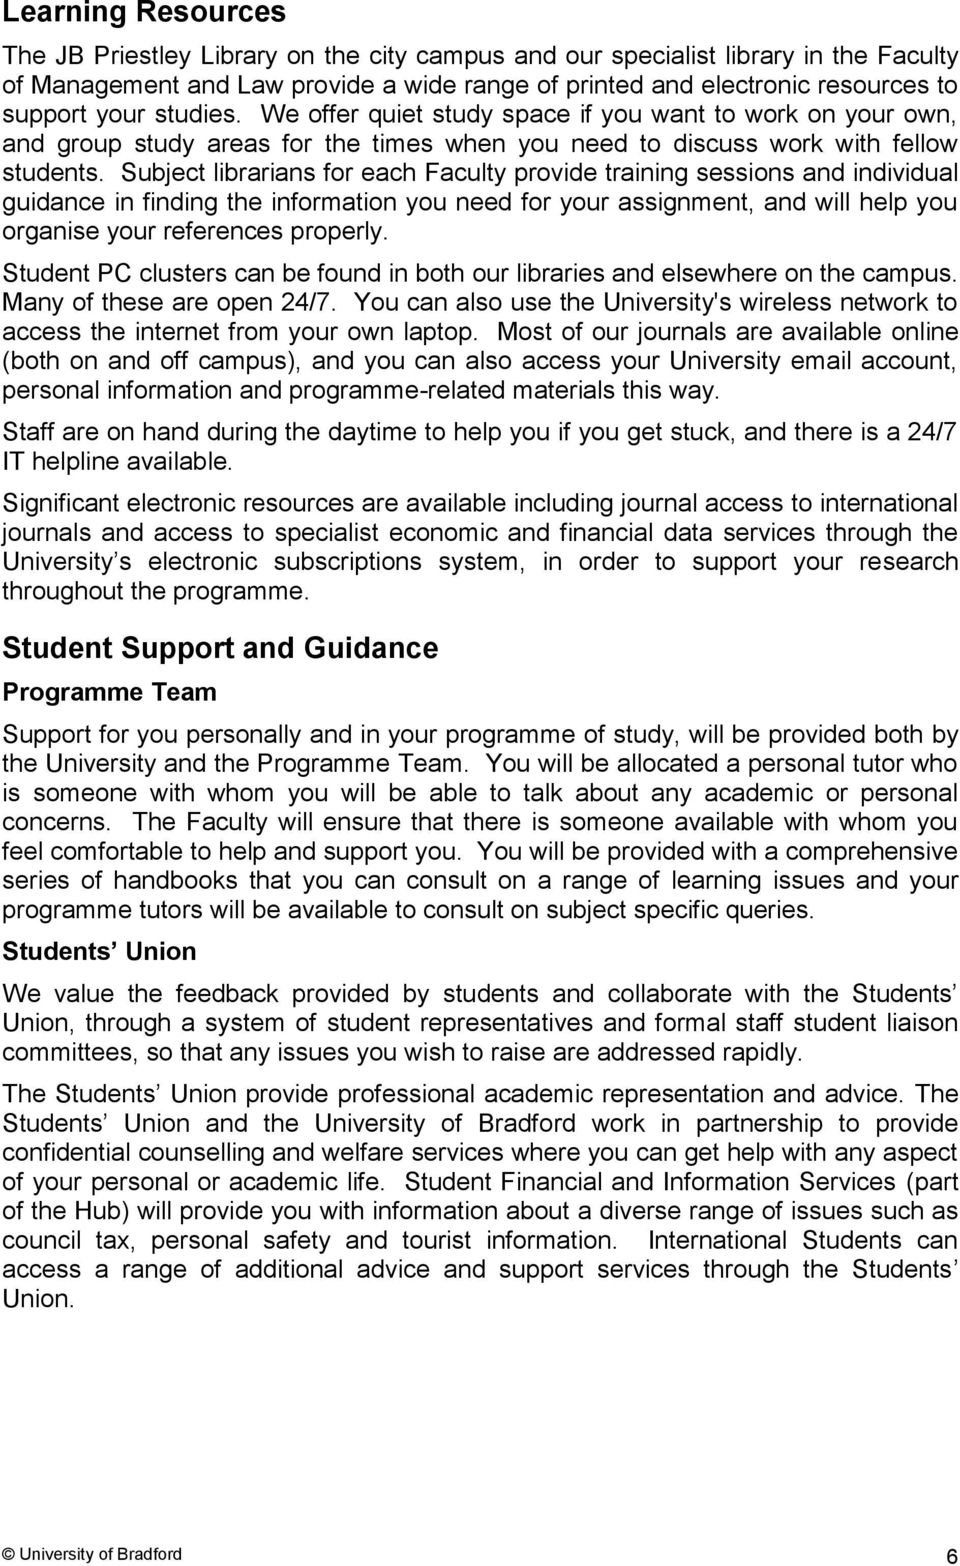 Subject librarians for each Faculty provide training sessions and individual guidance in finding the information you need for your assignment, and will help you organise your references properly.